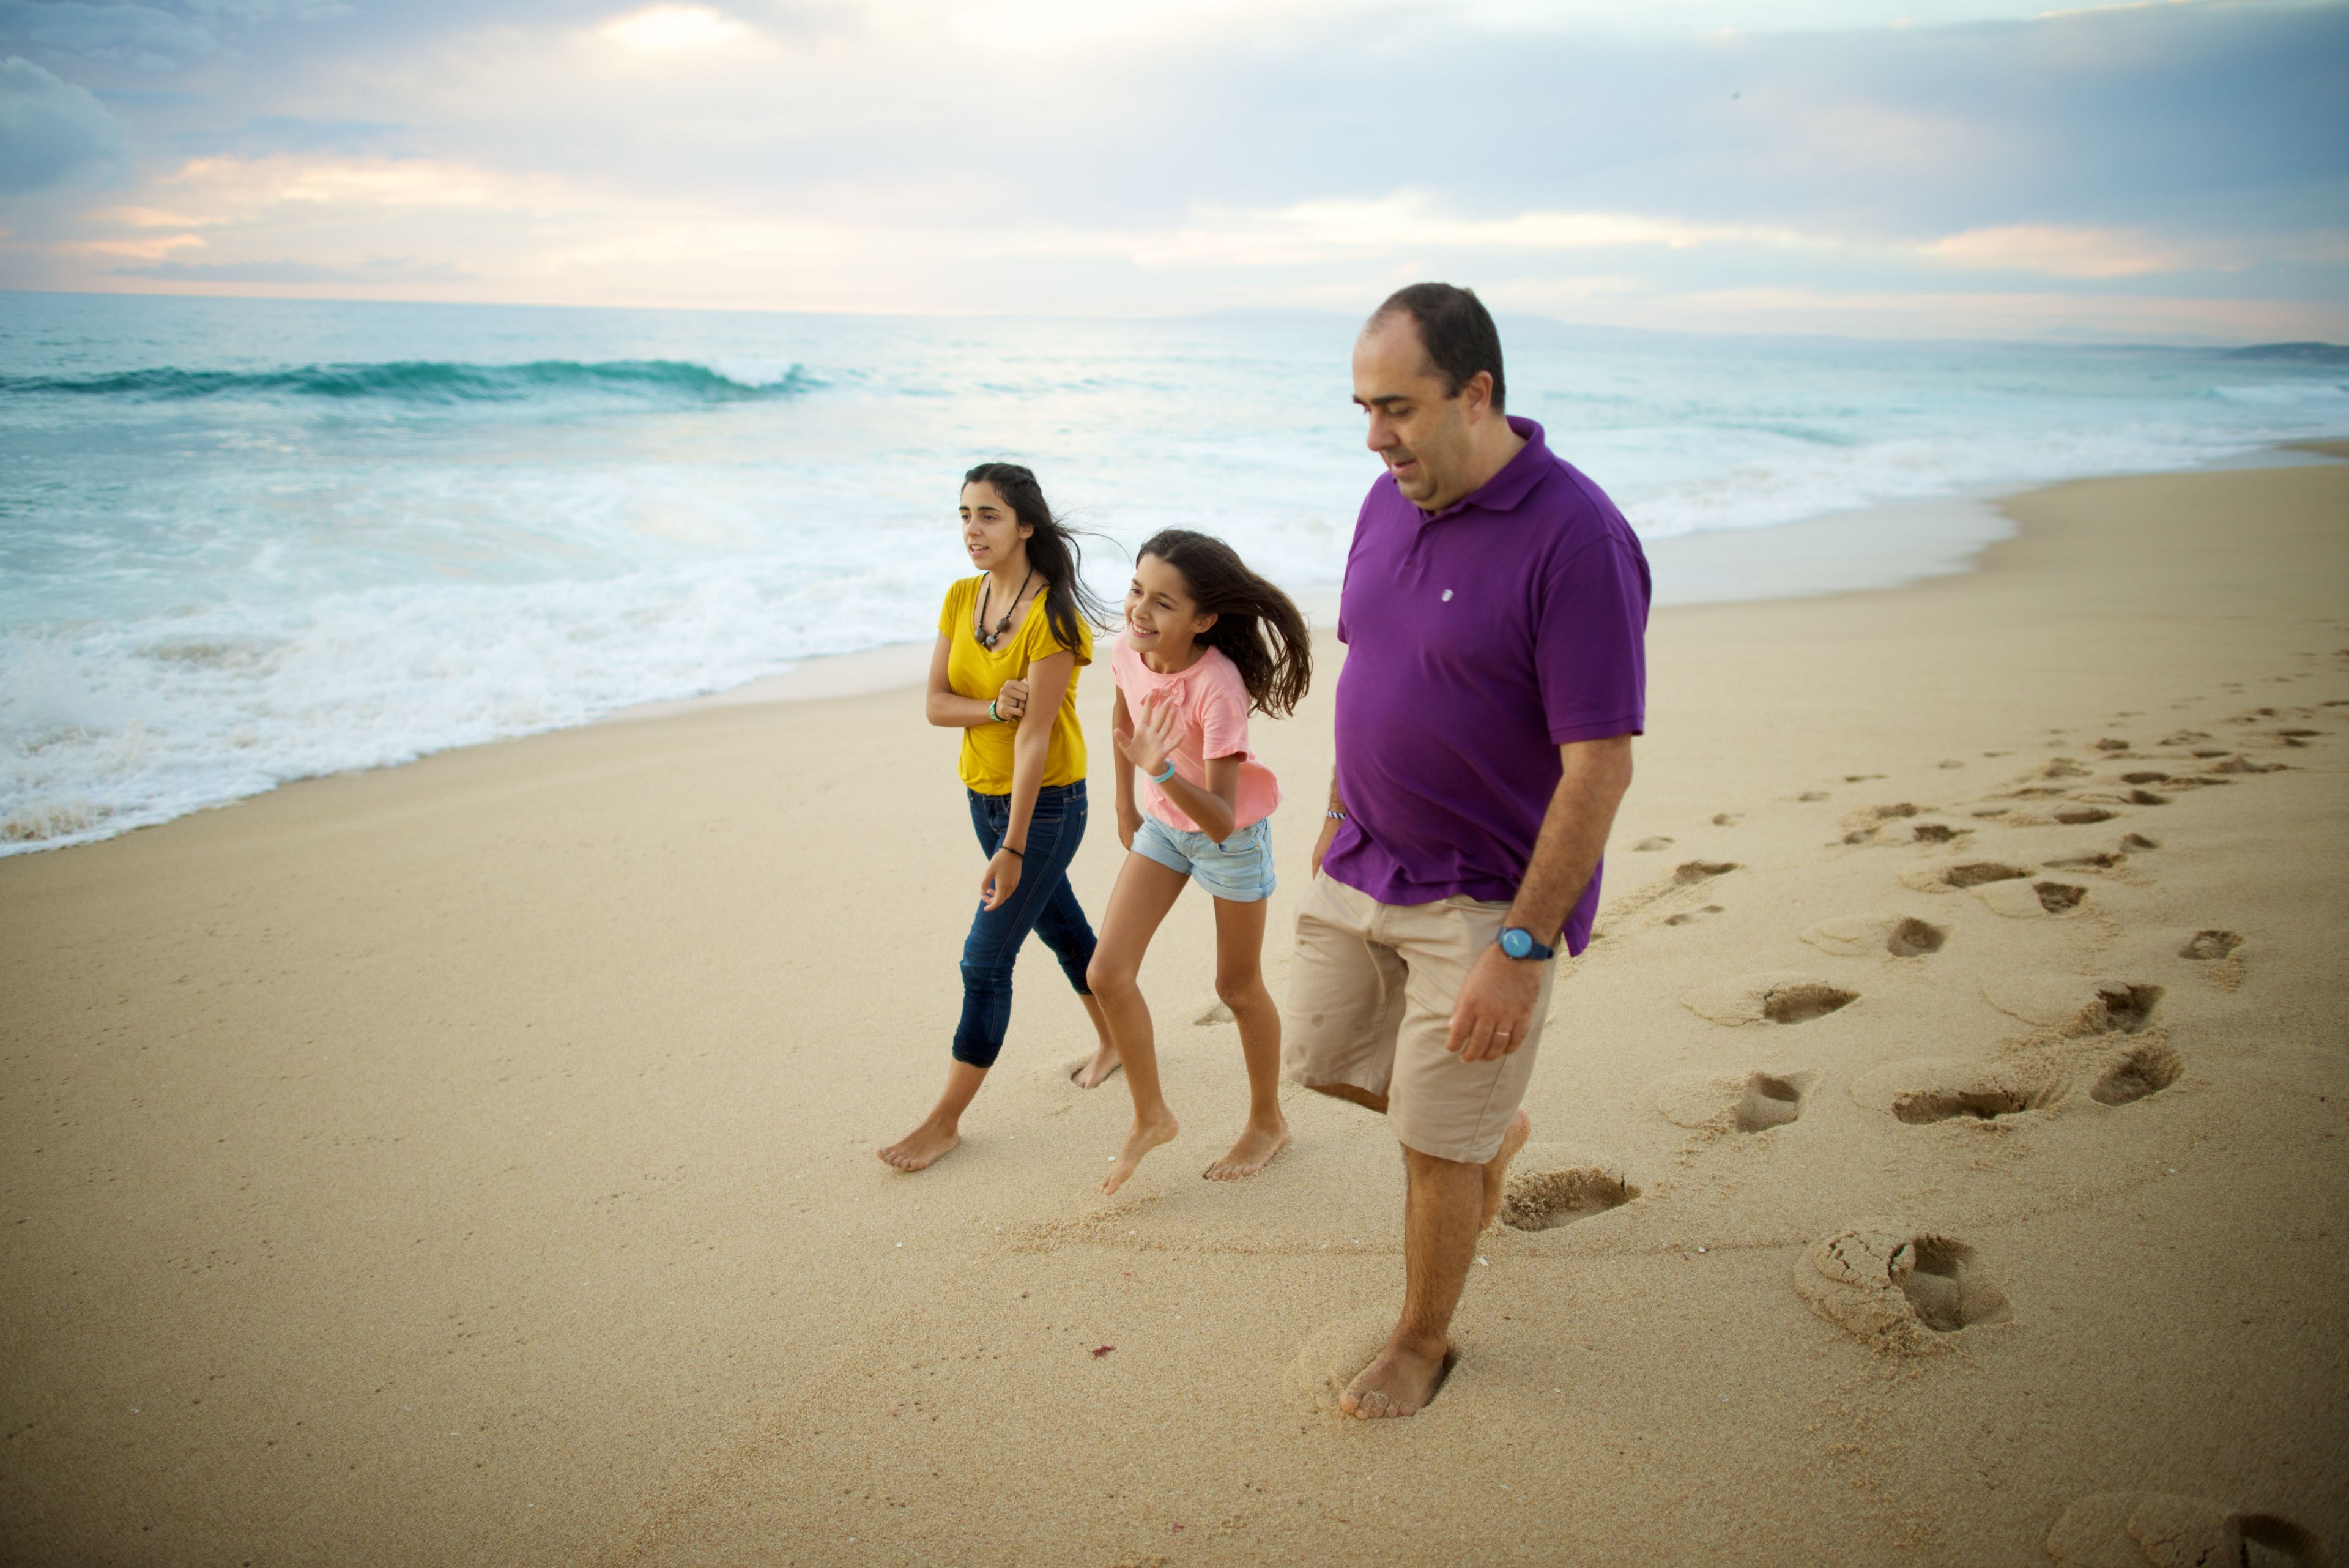 A father and two daughters walk together along the beach.